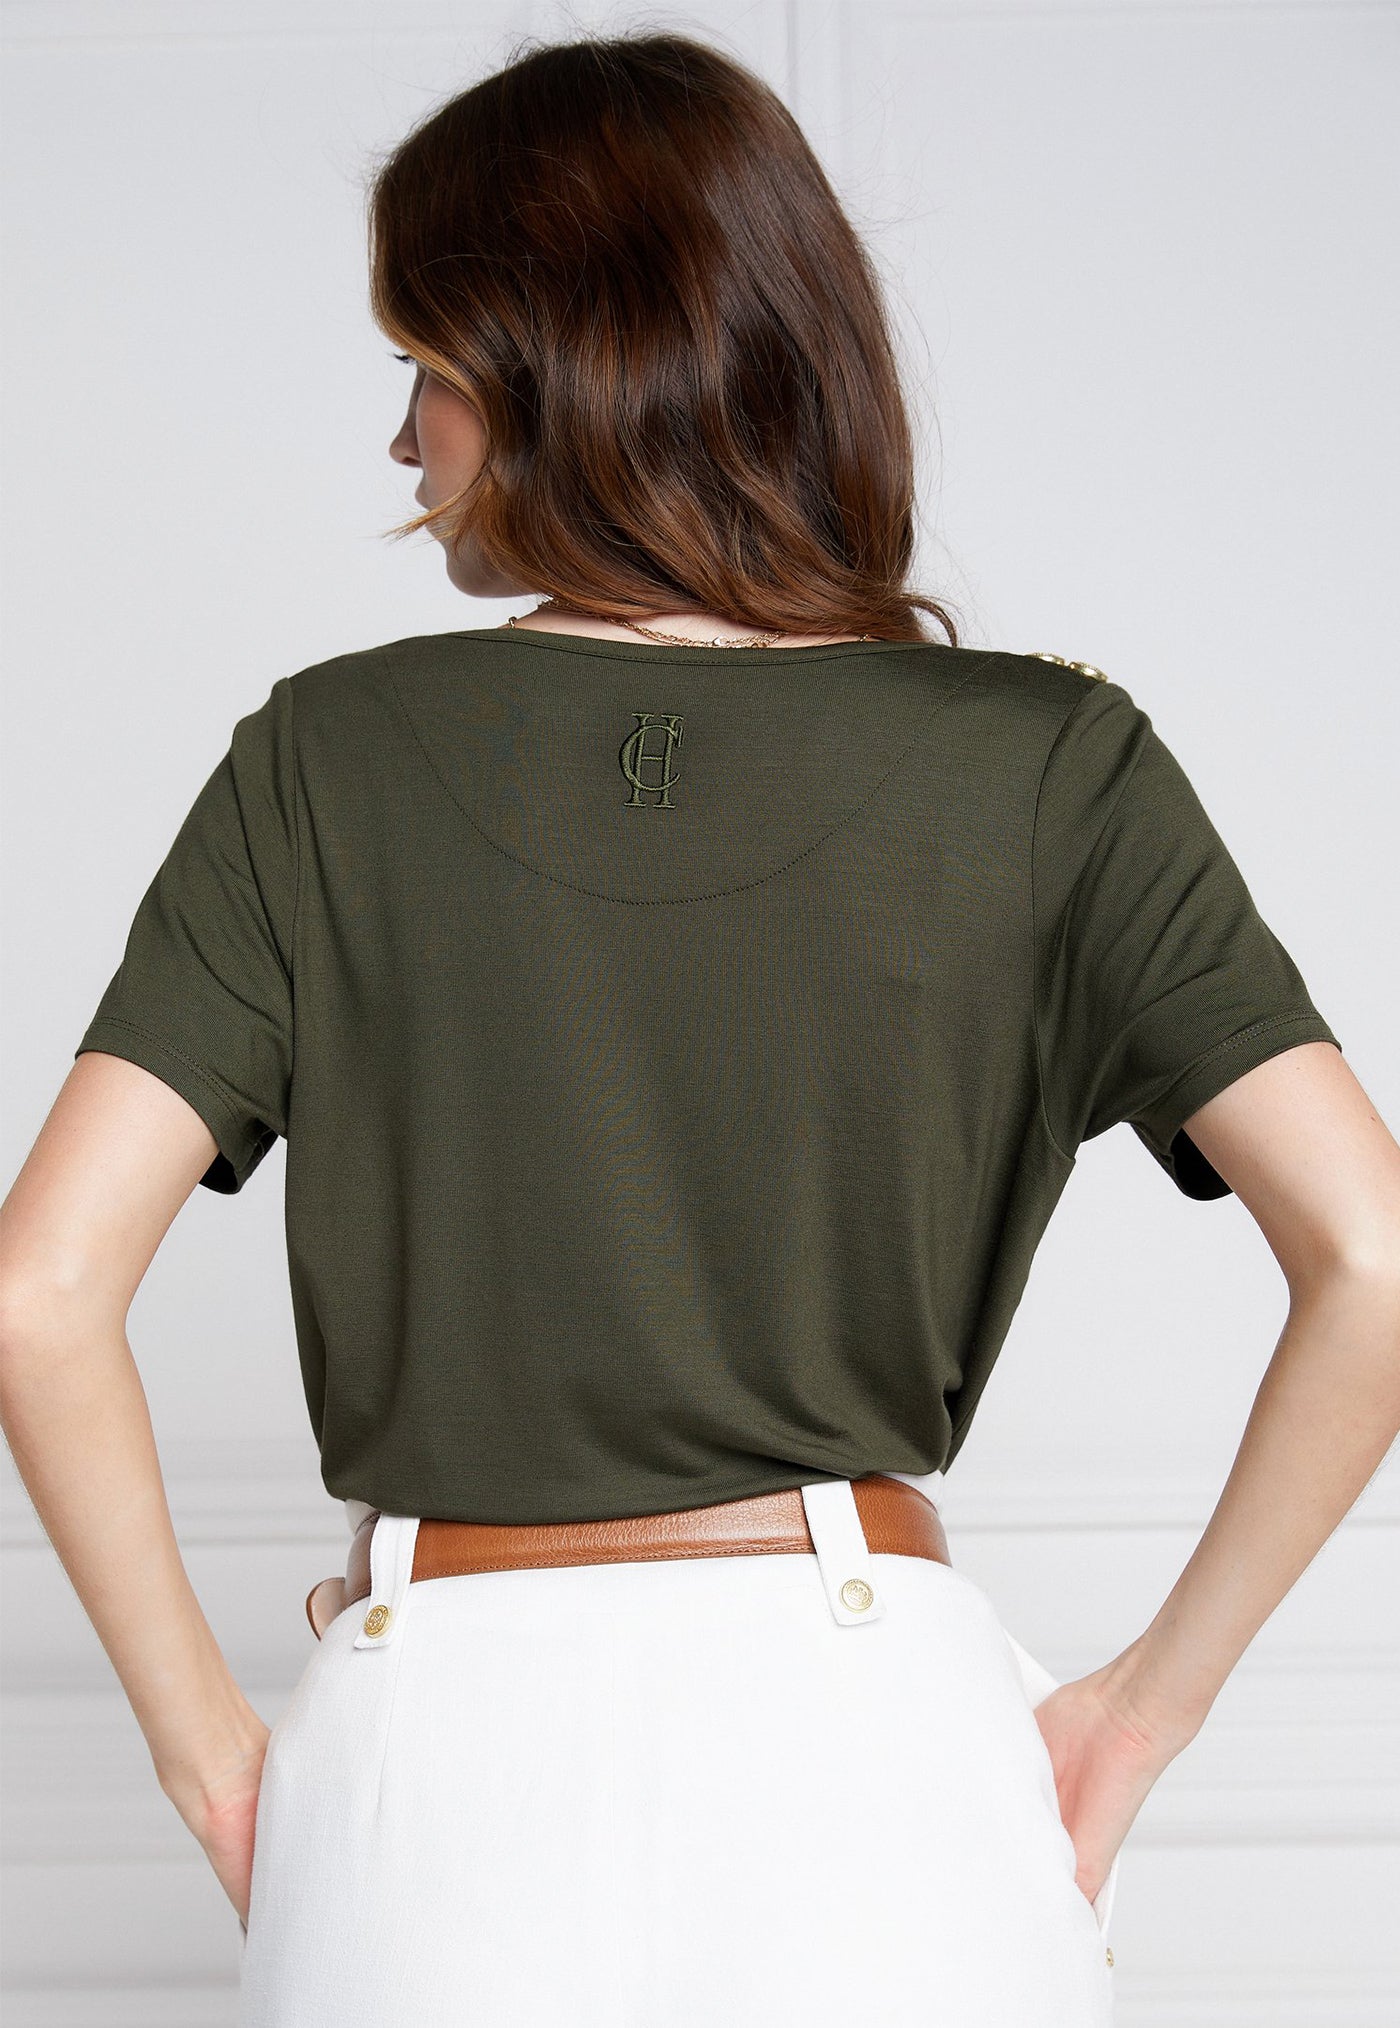 Relaxed Fit V Neck Tee - Khaki sold by Angel Divine